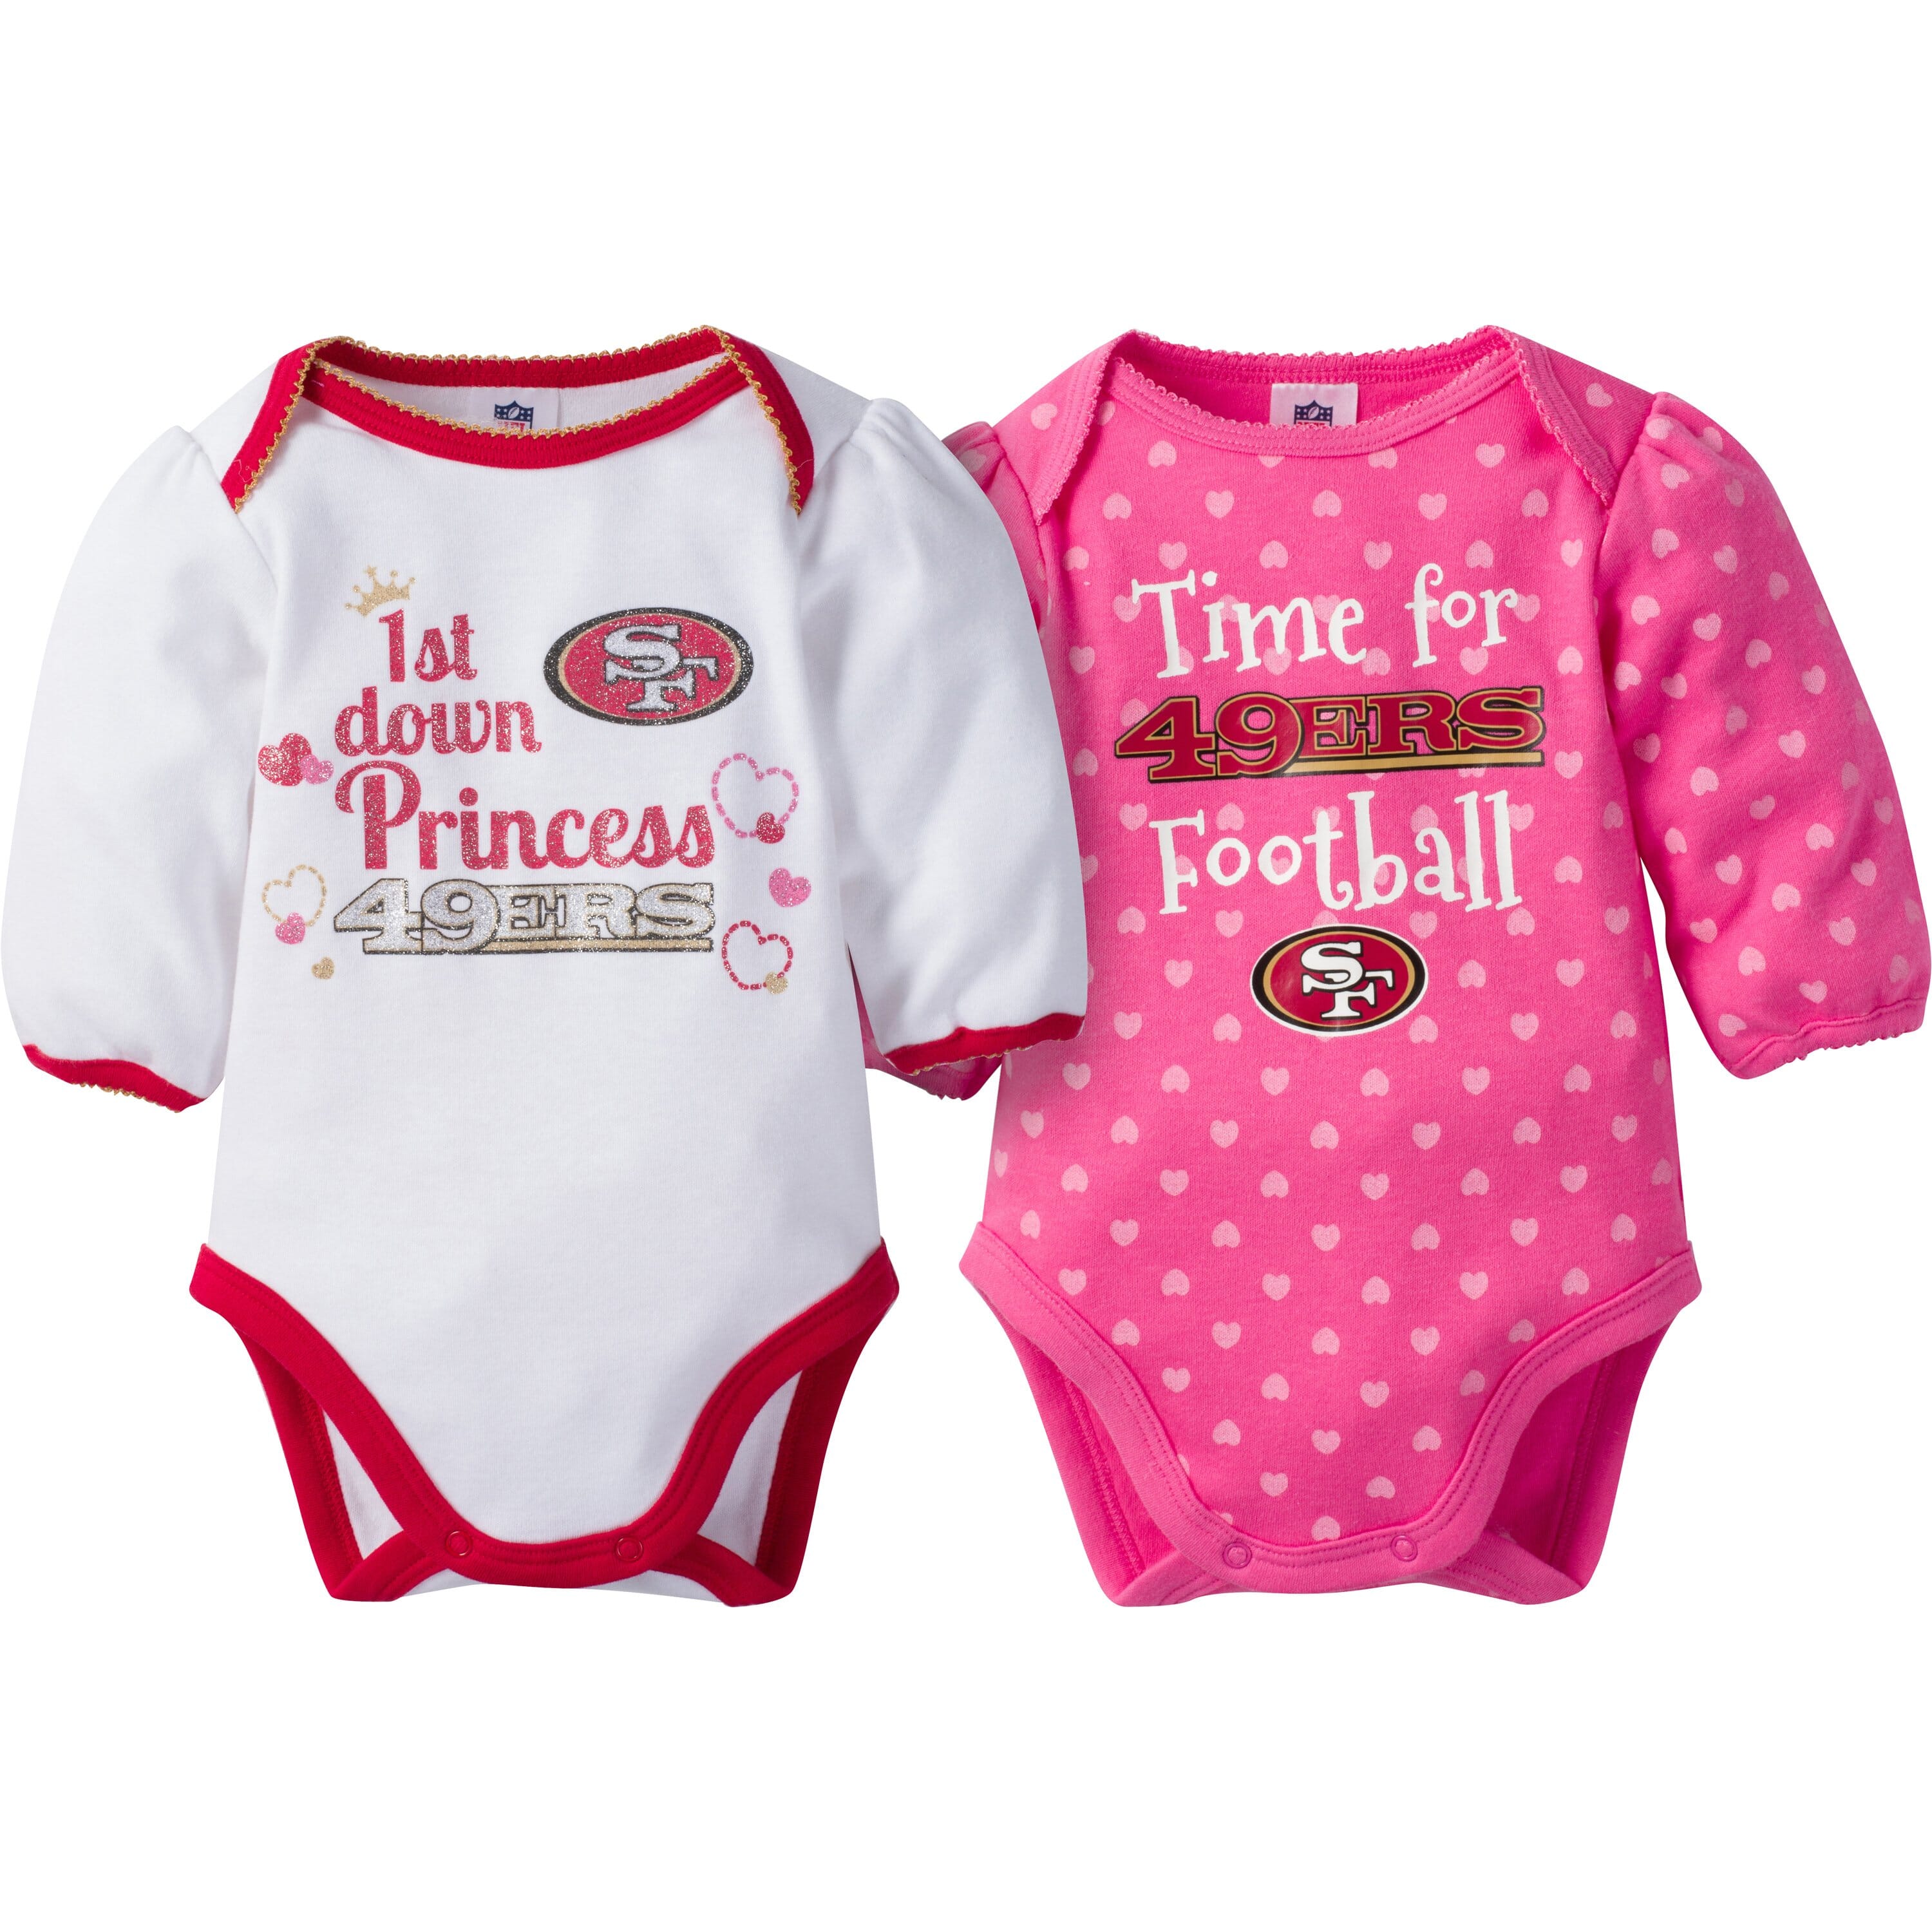 Girls San Francisco 49ers Outfit, Baby Girls Forty Niners Game Day